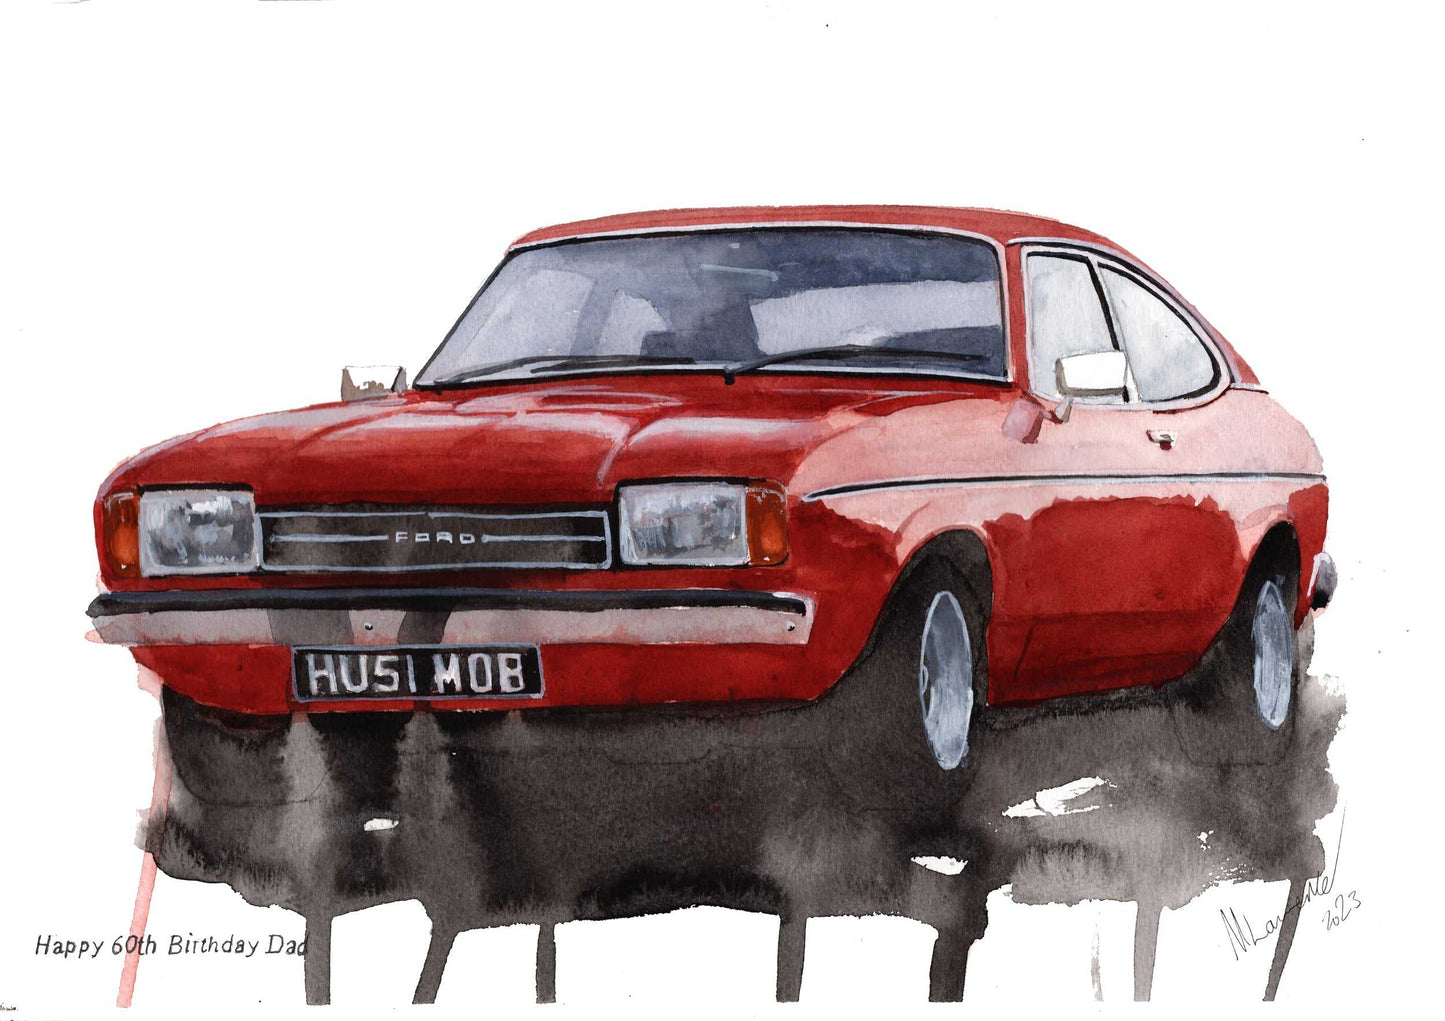 Ford capri Mk2 Commission Watercolour Painting ArtbyMyleslaurence